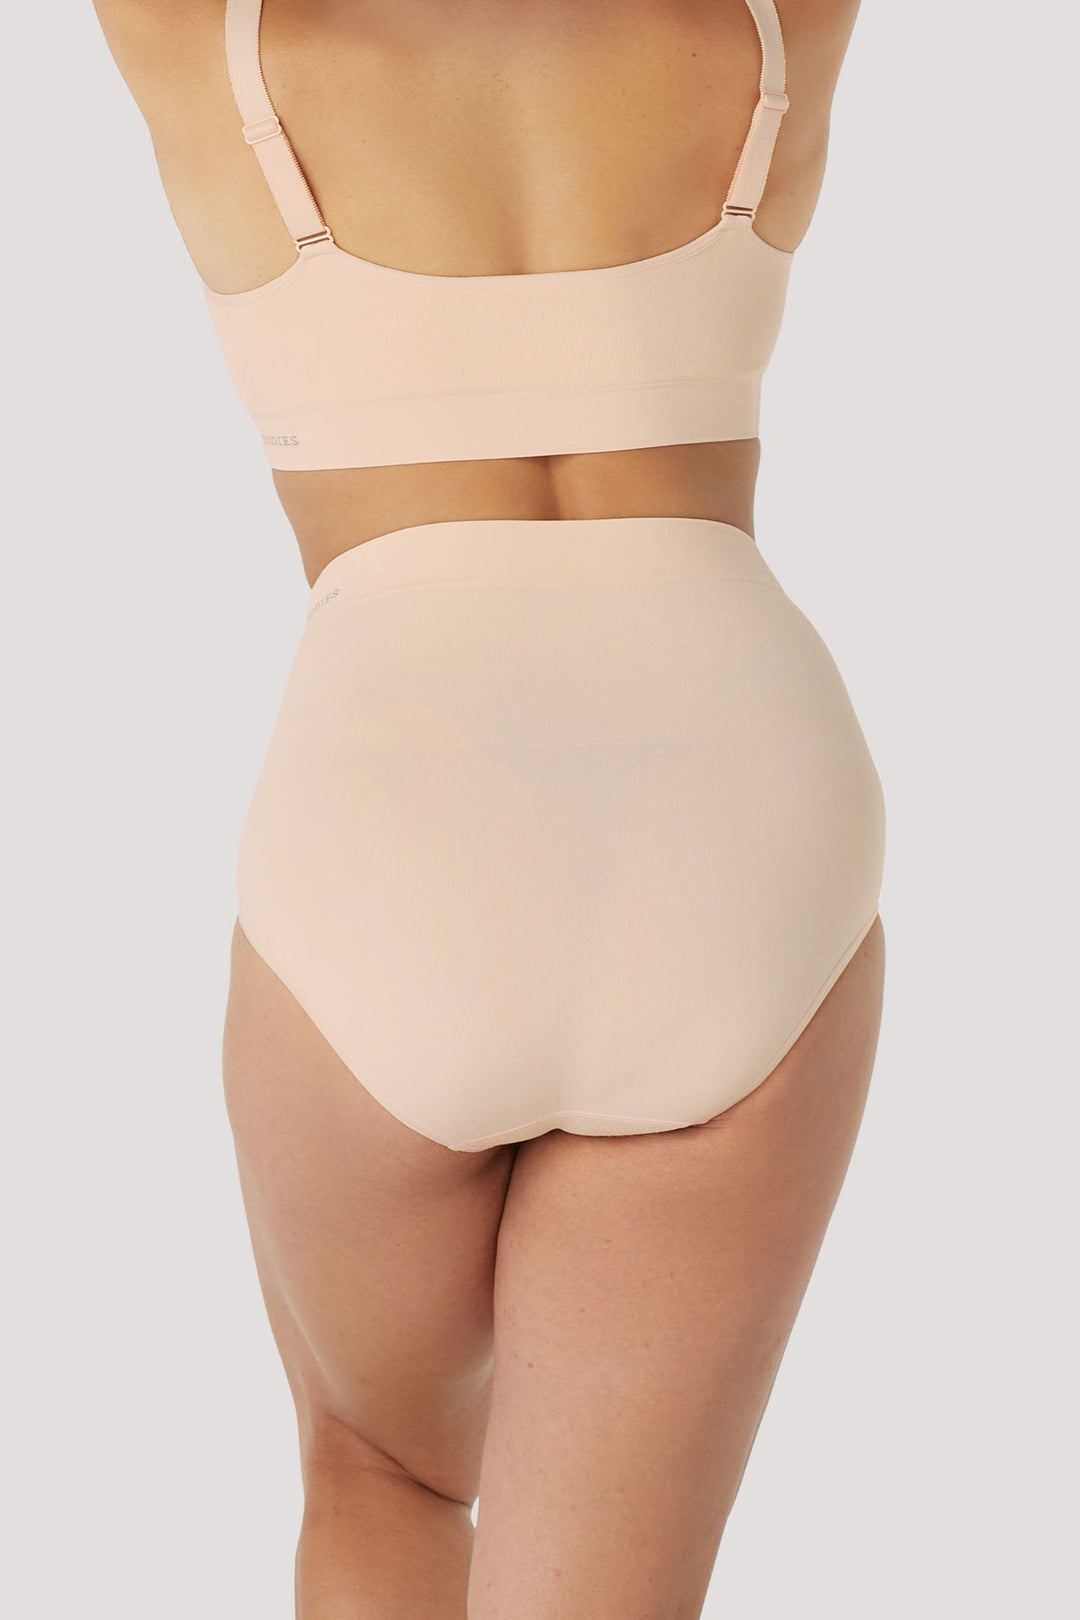 High Waist Smoothing and Firming, Full-Coverage Underwear 2 pack | Bella Bodies UK | Soft Peach | Back